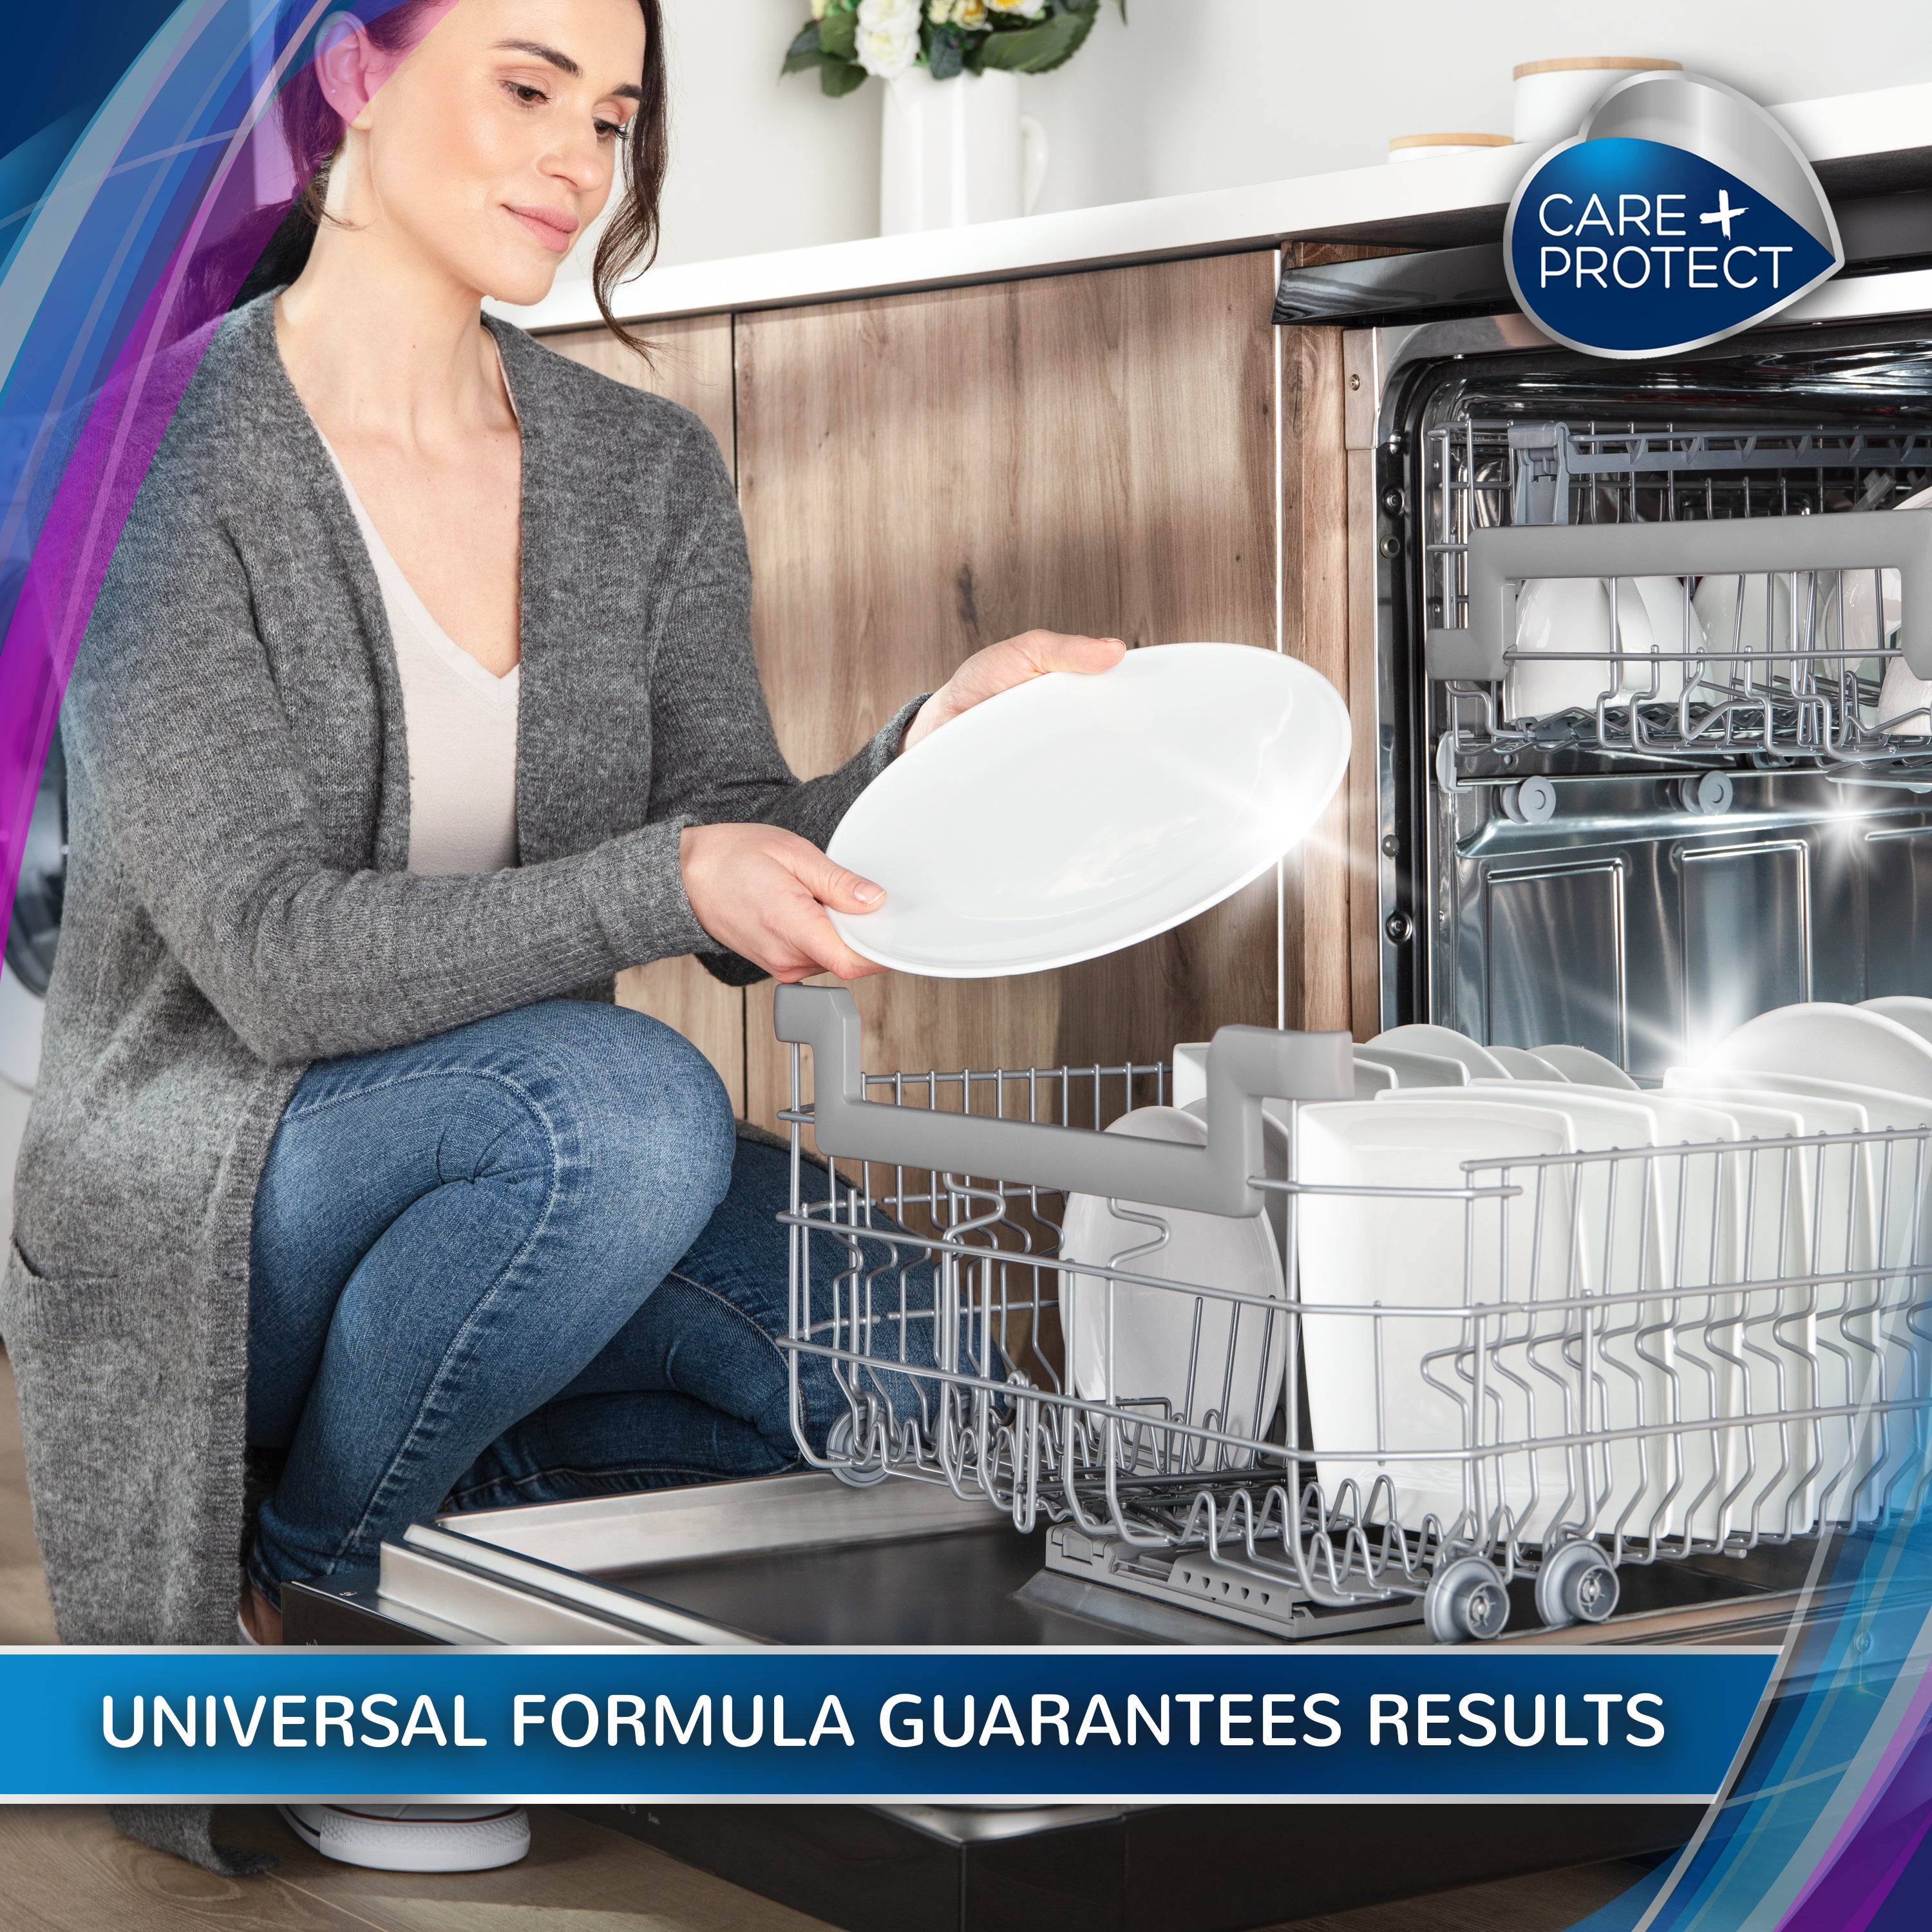 All-in-One Detergent Tablets for Dishwashers